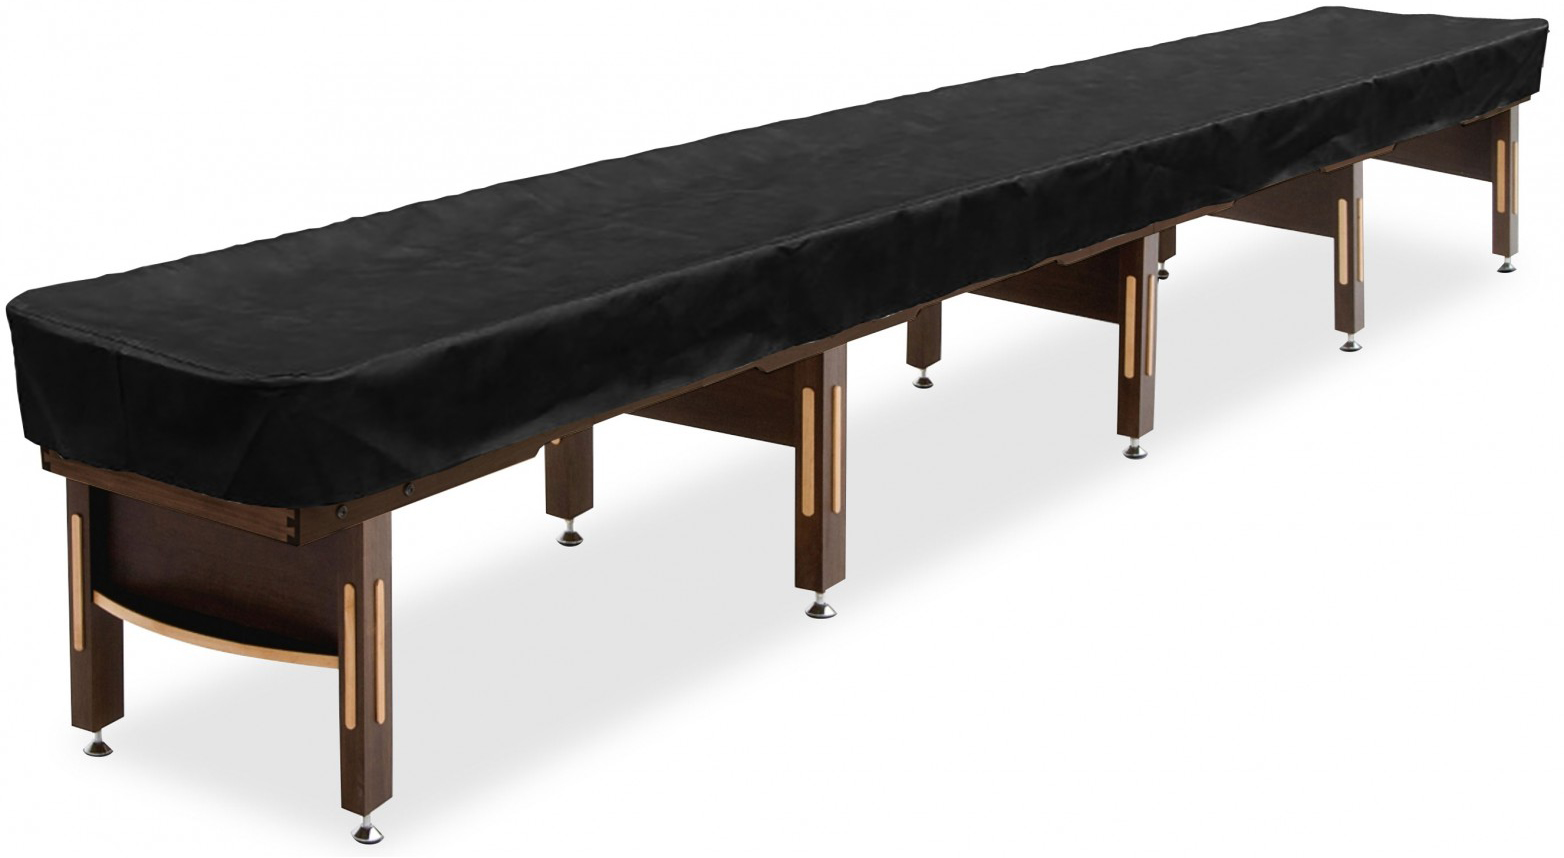 Hudson Table Cover